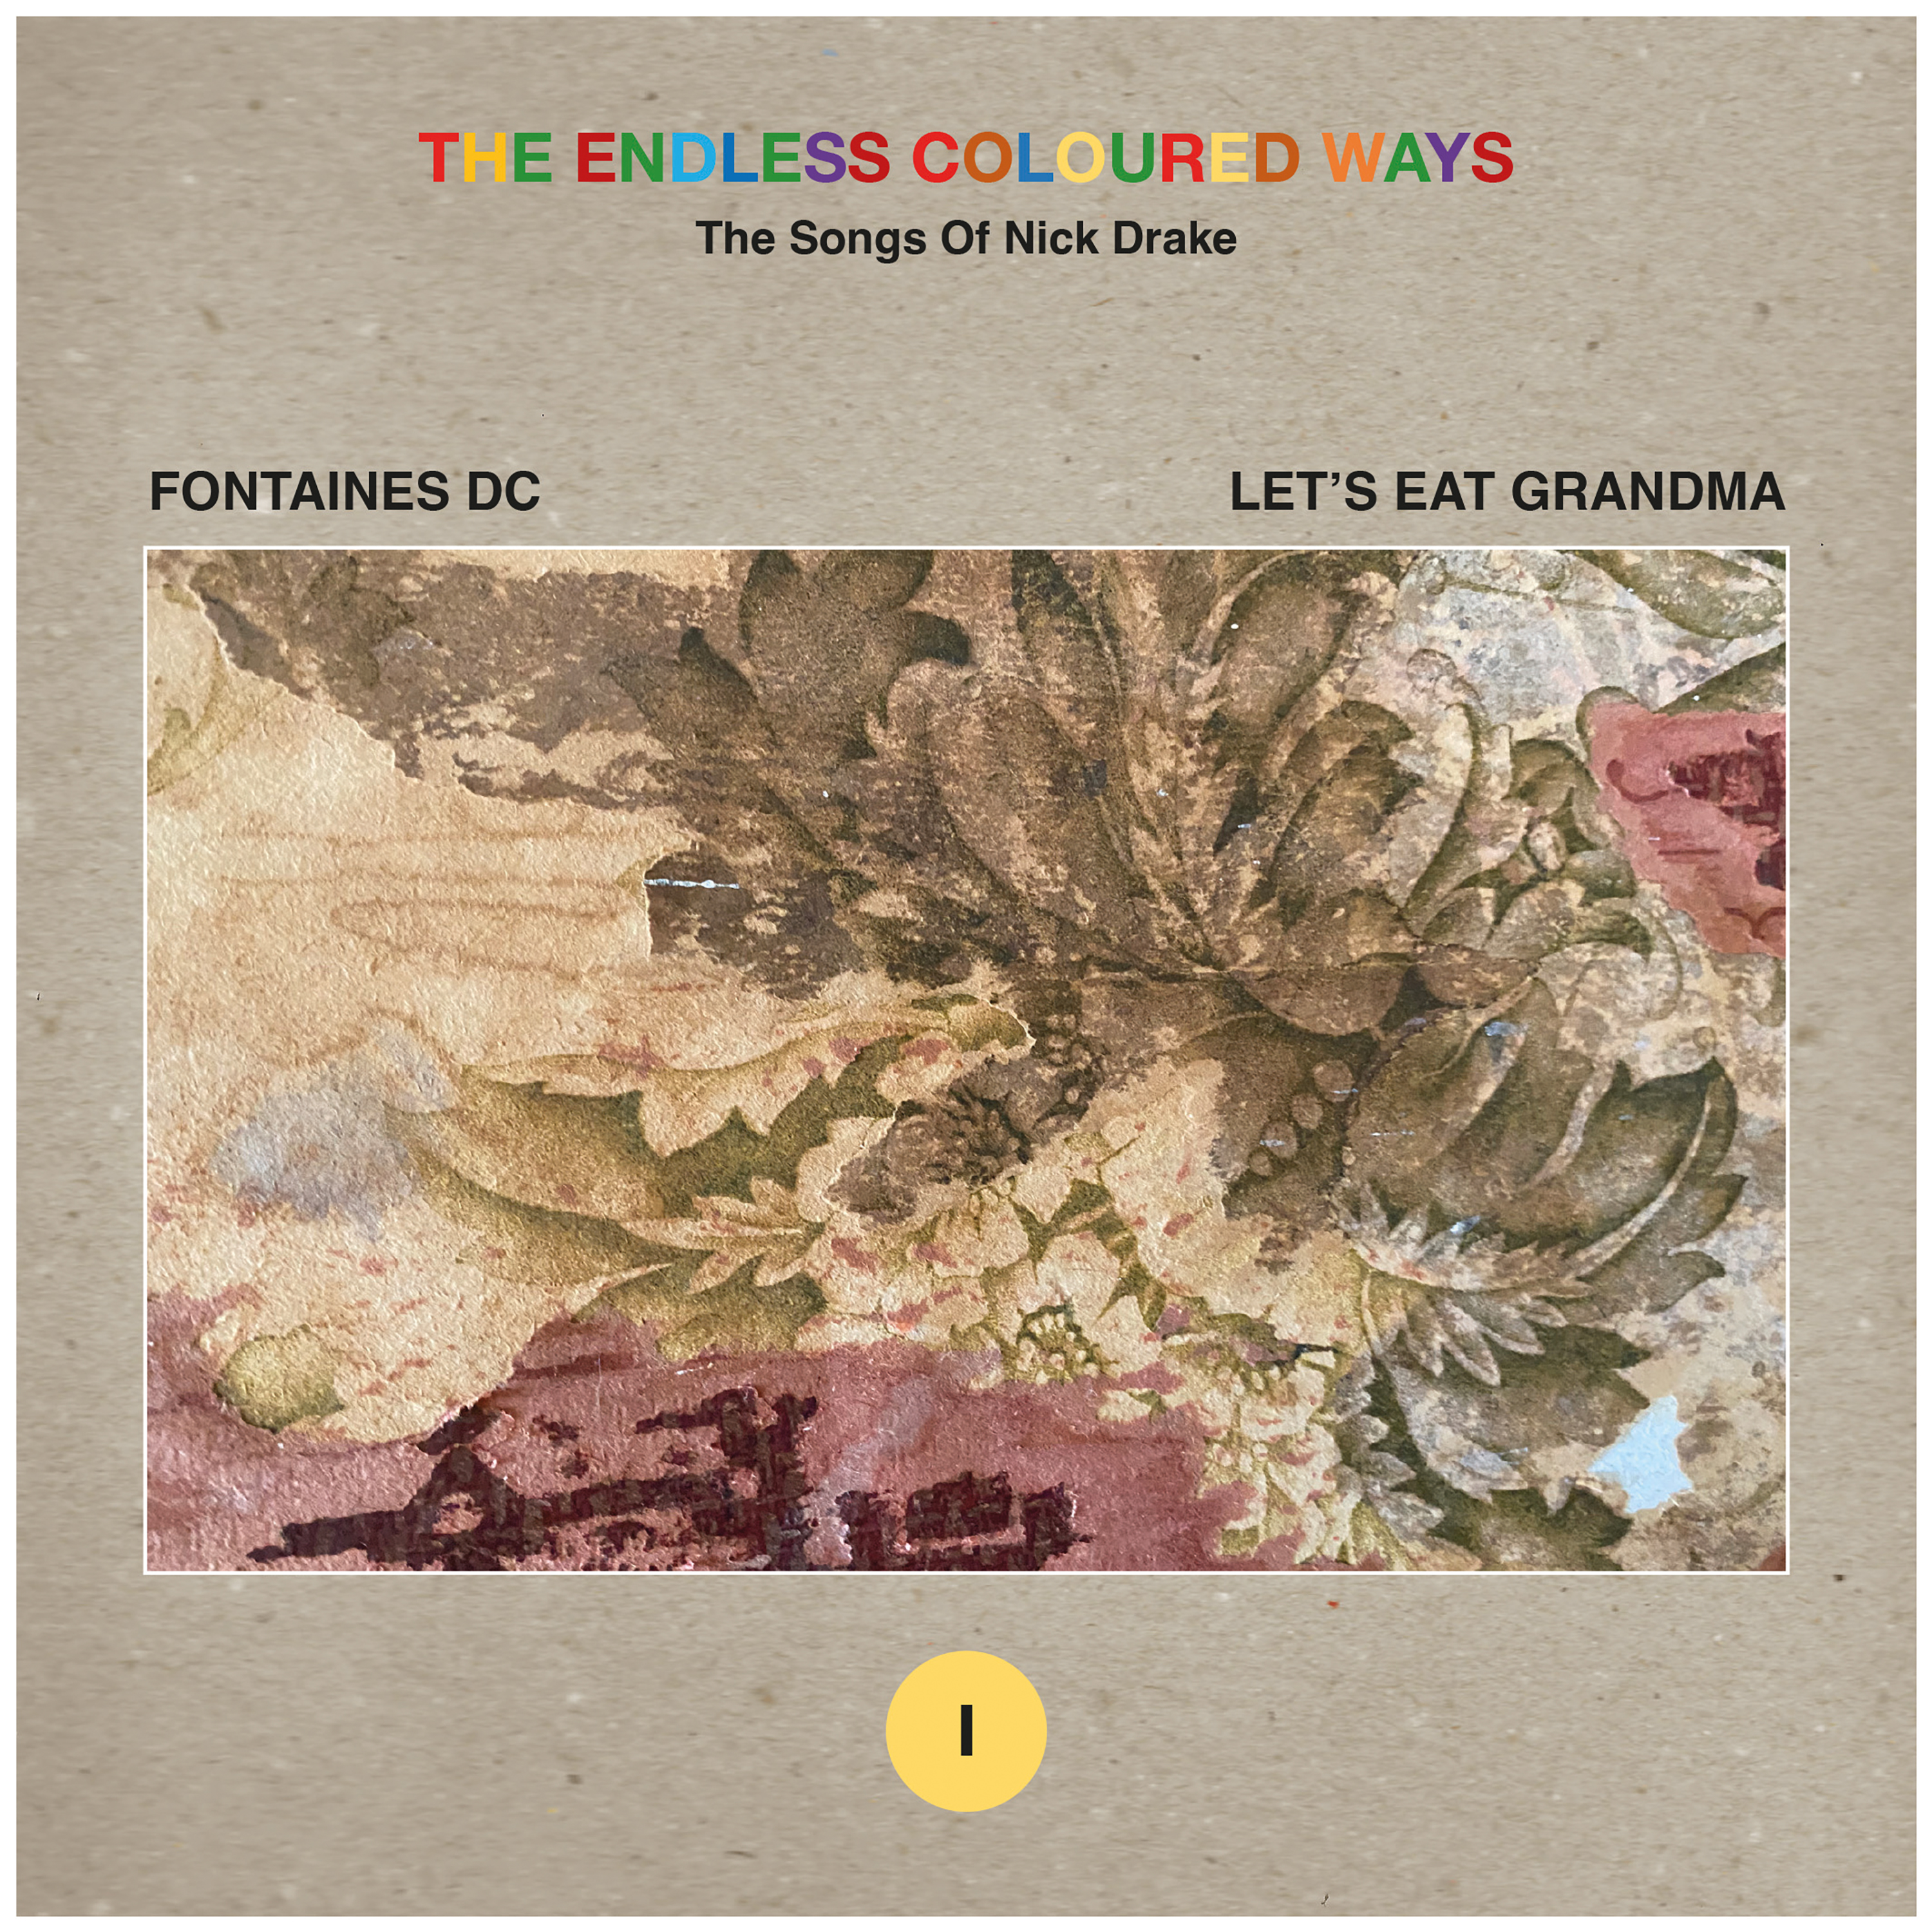 Fontaines D.C. / Let's Eat Grandma - The Endless Coloured Ways: The Song